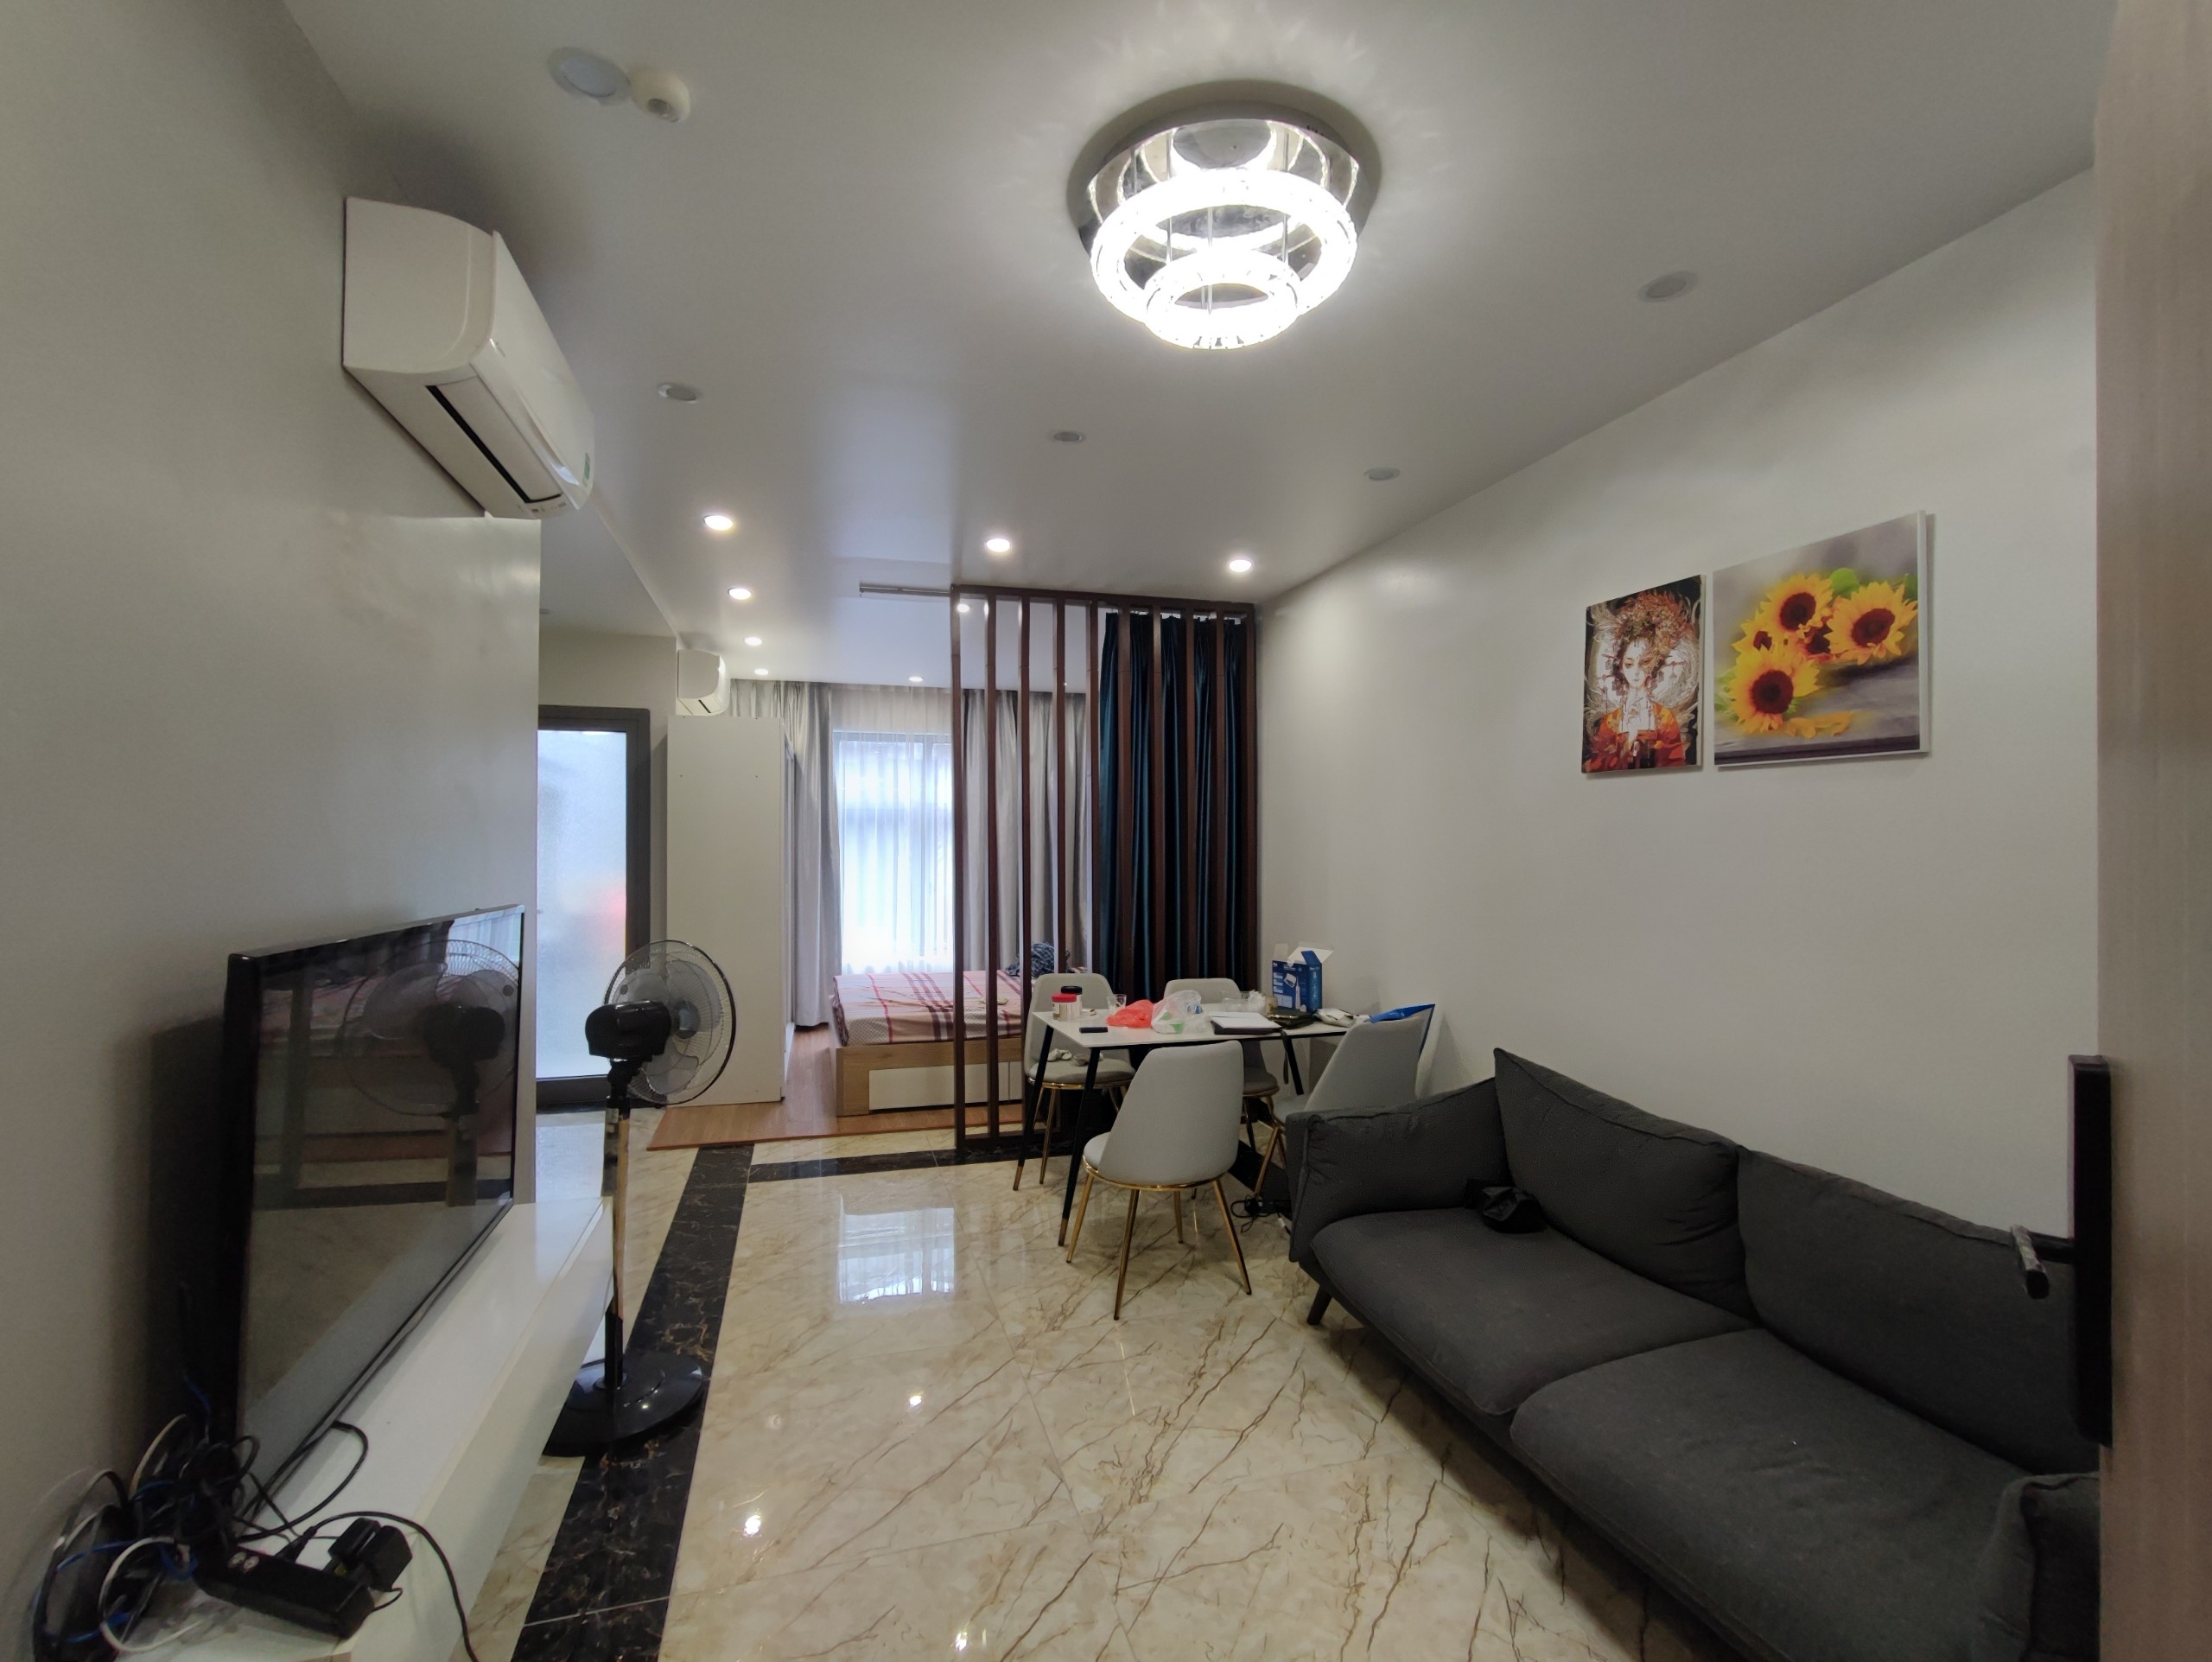 Brand new one bedroom apartment in Le Van Luong, Thanh Xuan